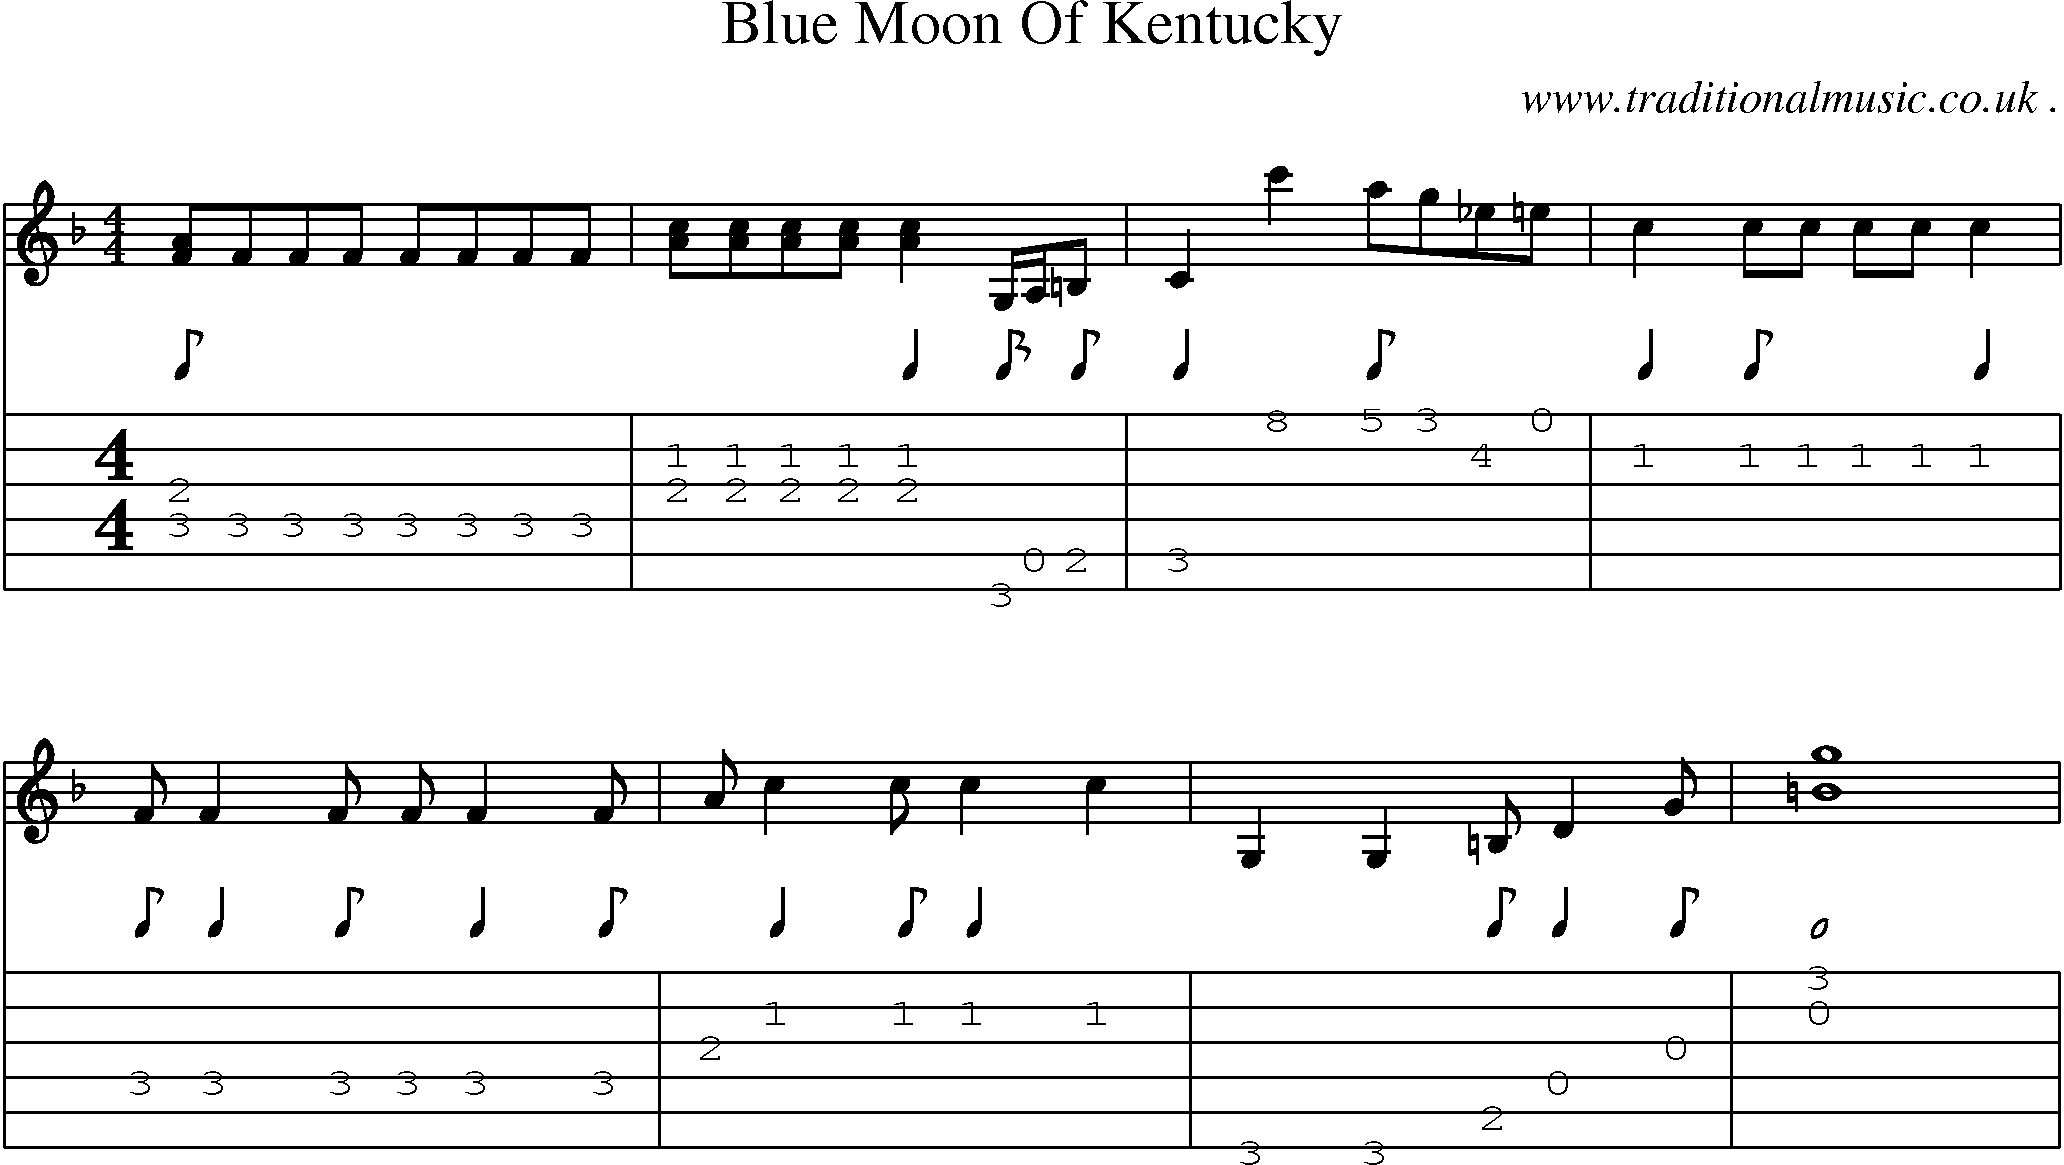 Music Score and Guitar Tabs for Blue Moon Of Kentucky